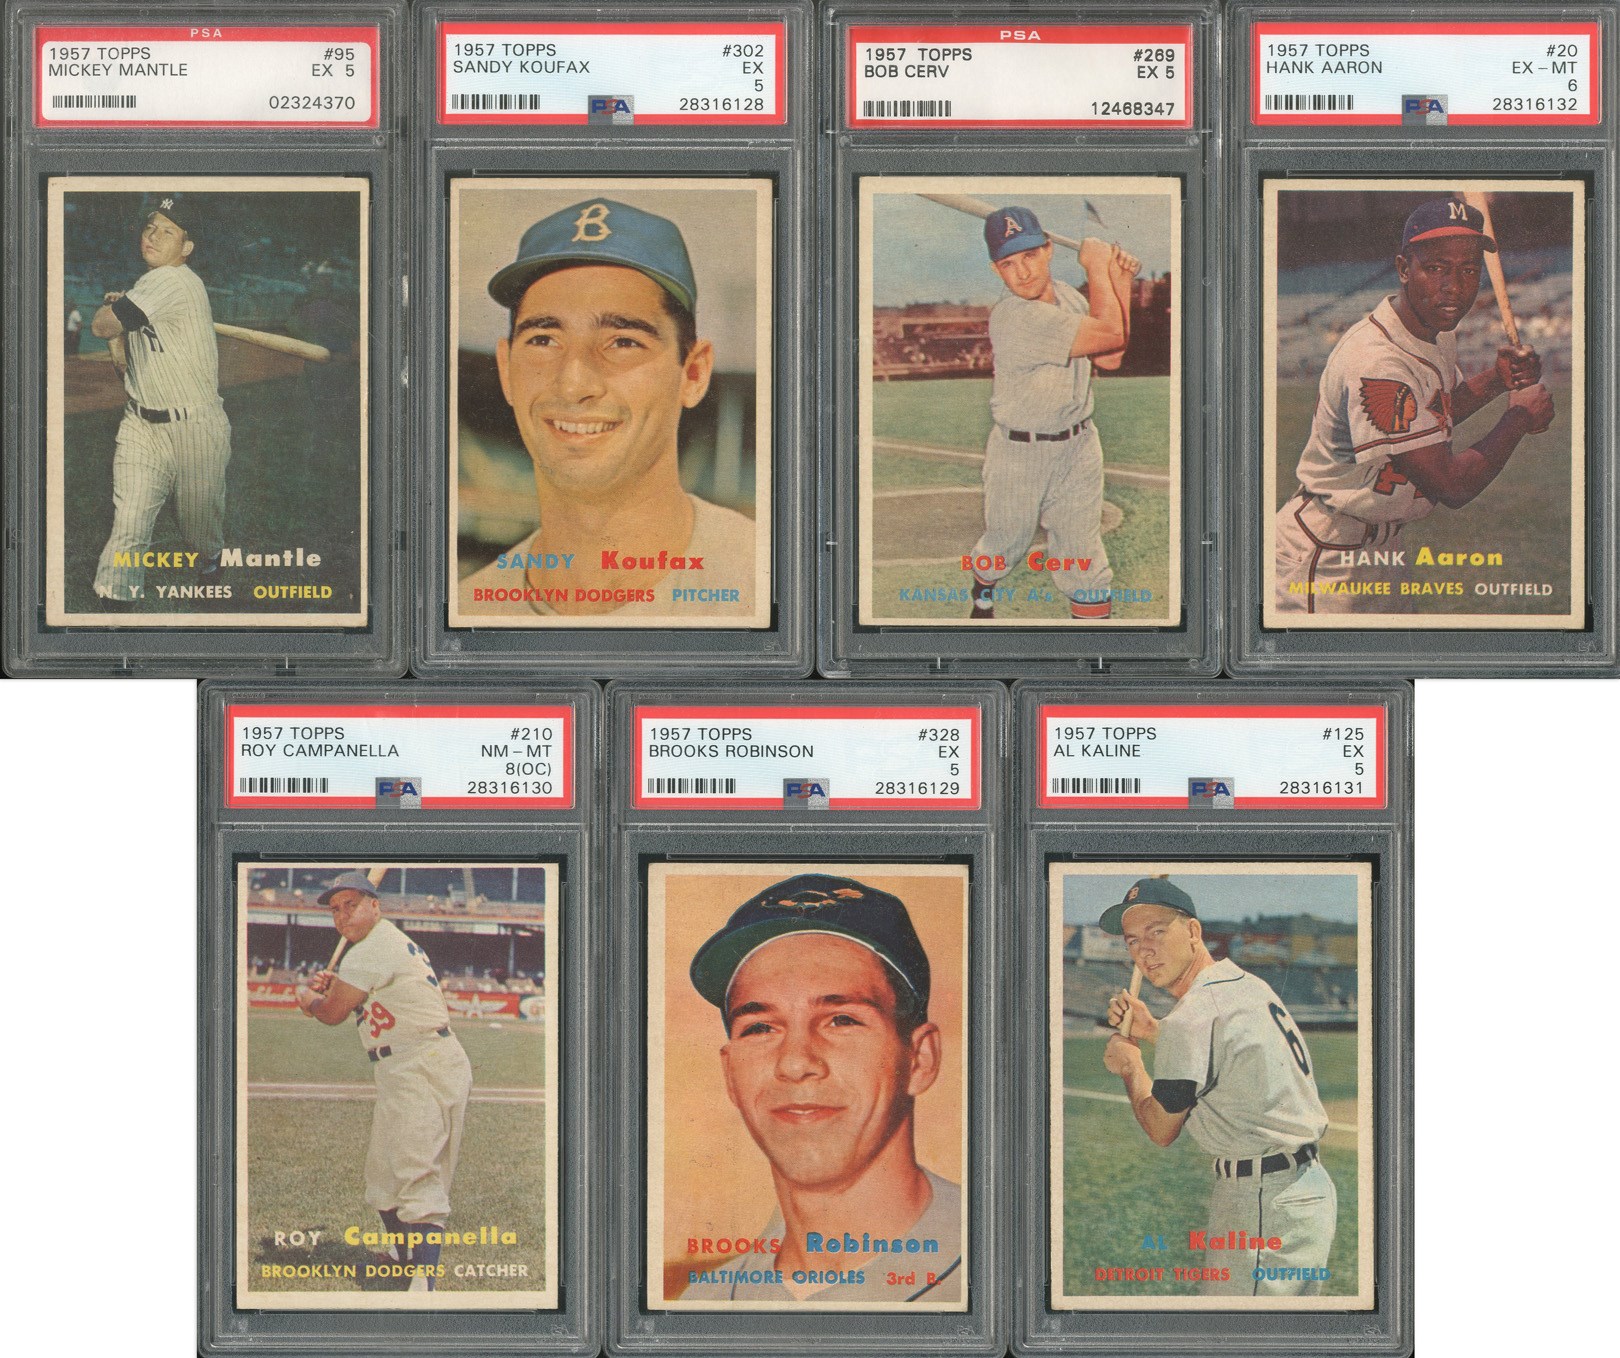 Baseball and Trading Cards - 1957 Topps Complete Set Plus Lucky Penny, Felt Emblem and Others (415)